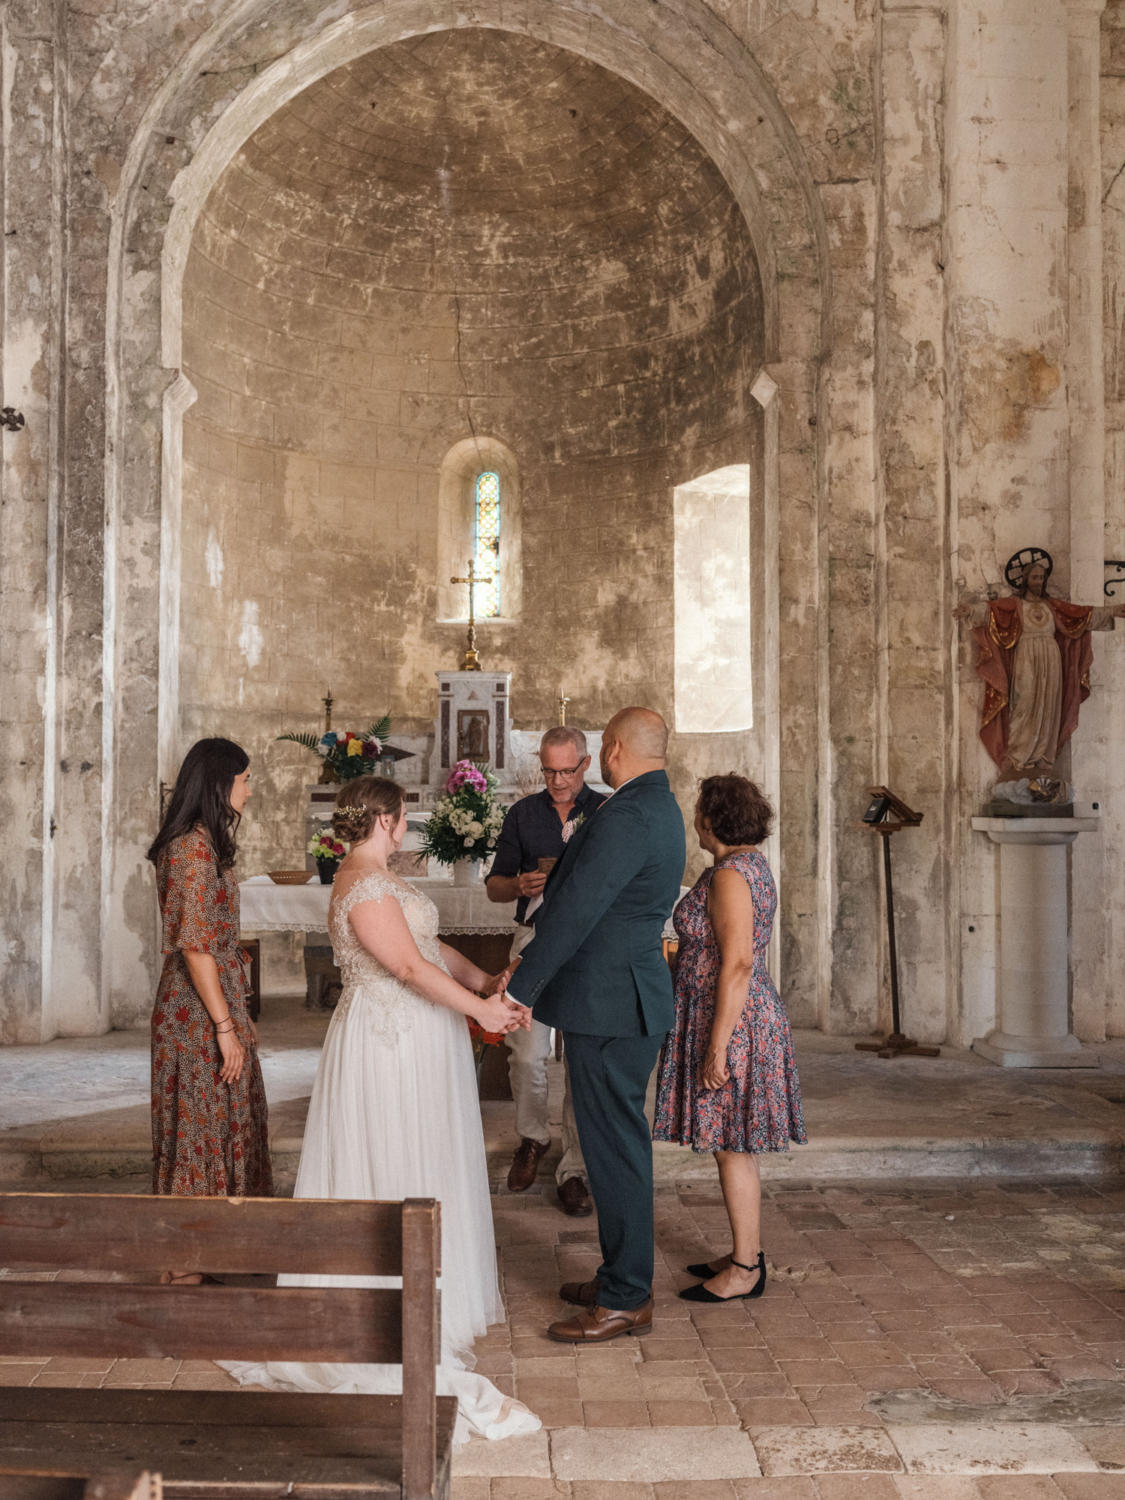 wedding ceremony in old church in provence france